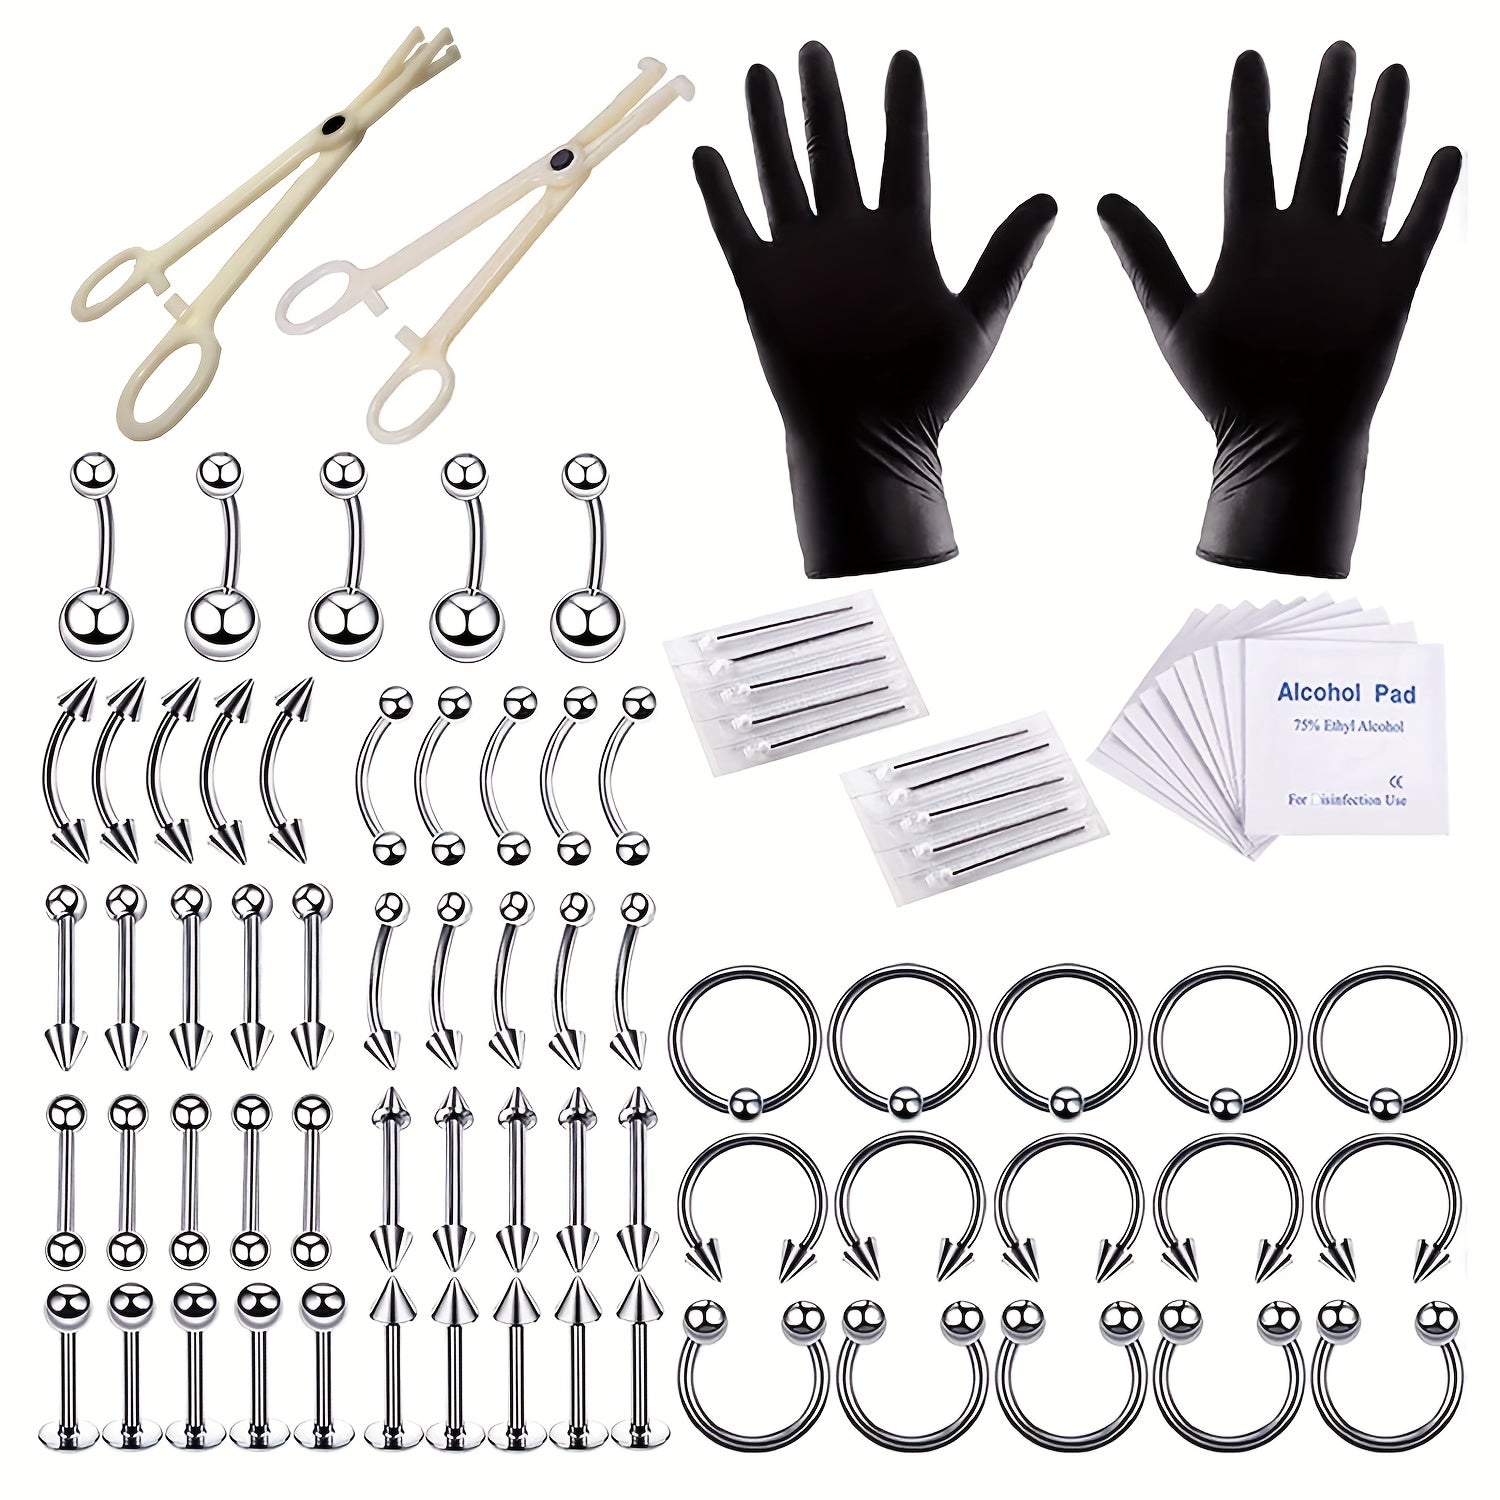 85pcs Piercing Tool Kit With Nose Ring Eyebrow Nail Ear Bone Nail Body Piercing Tool Jewelry